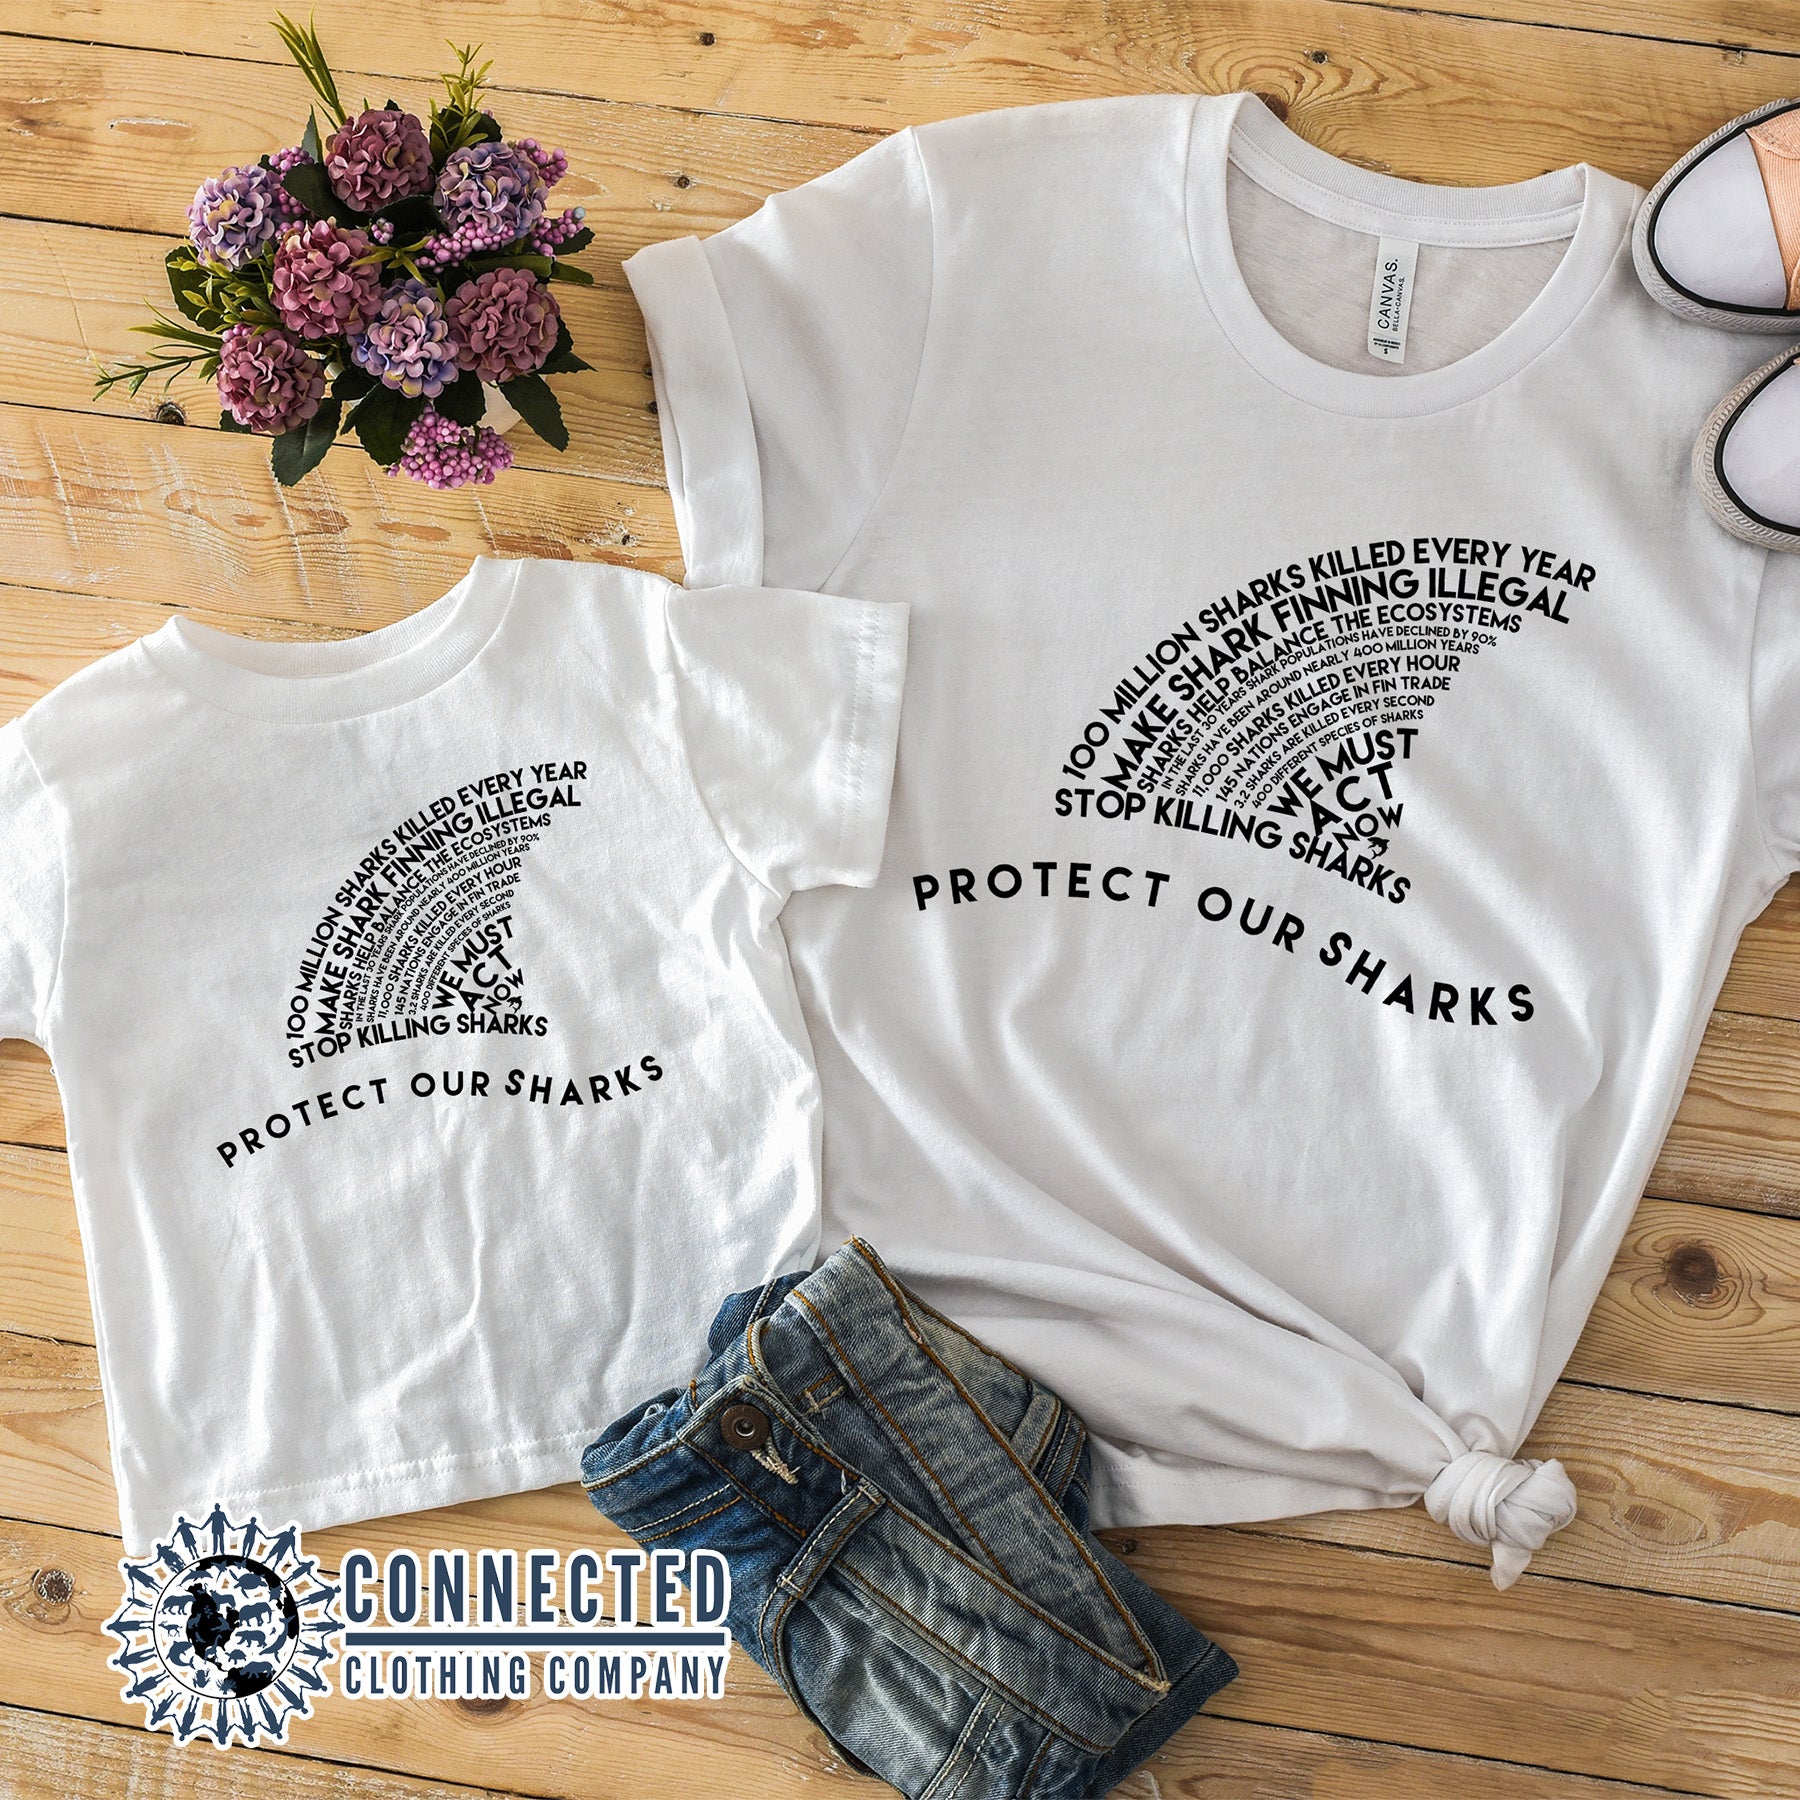 White Adult and Toddler Protect Our Sharks Toddler Short-Sleeve Tee - Connected Clothing Company - 10% of profits donated to Oceana shark conservation